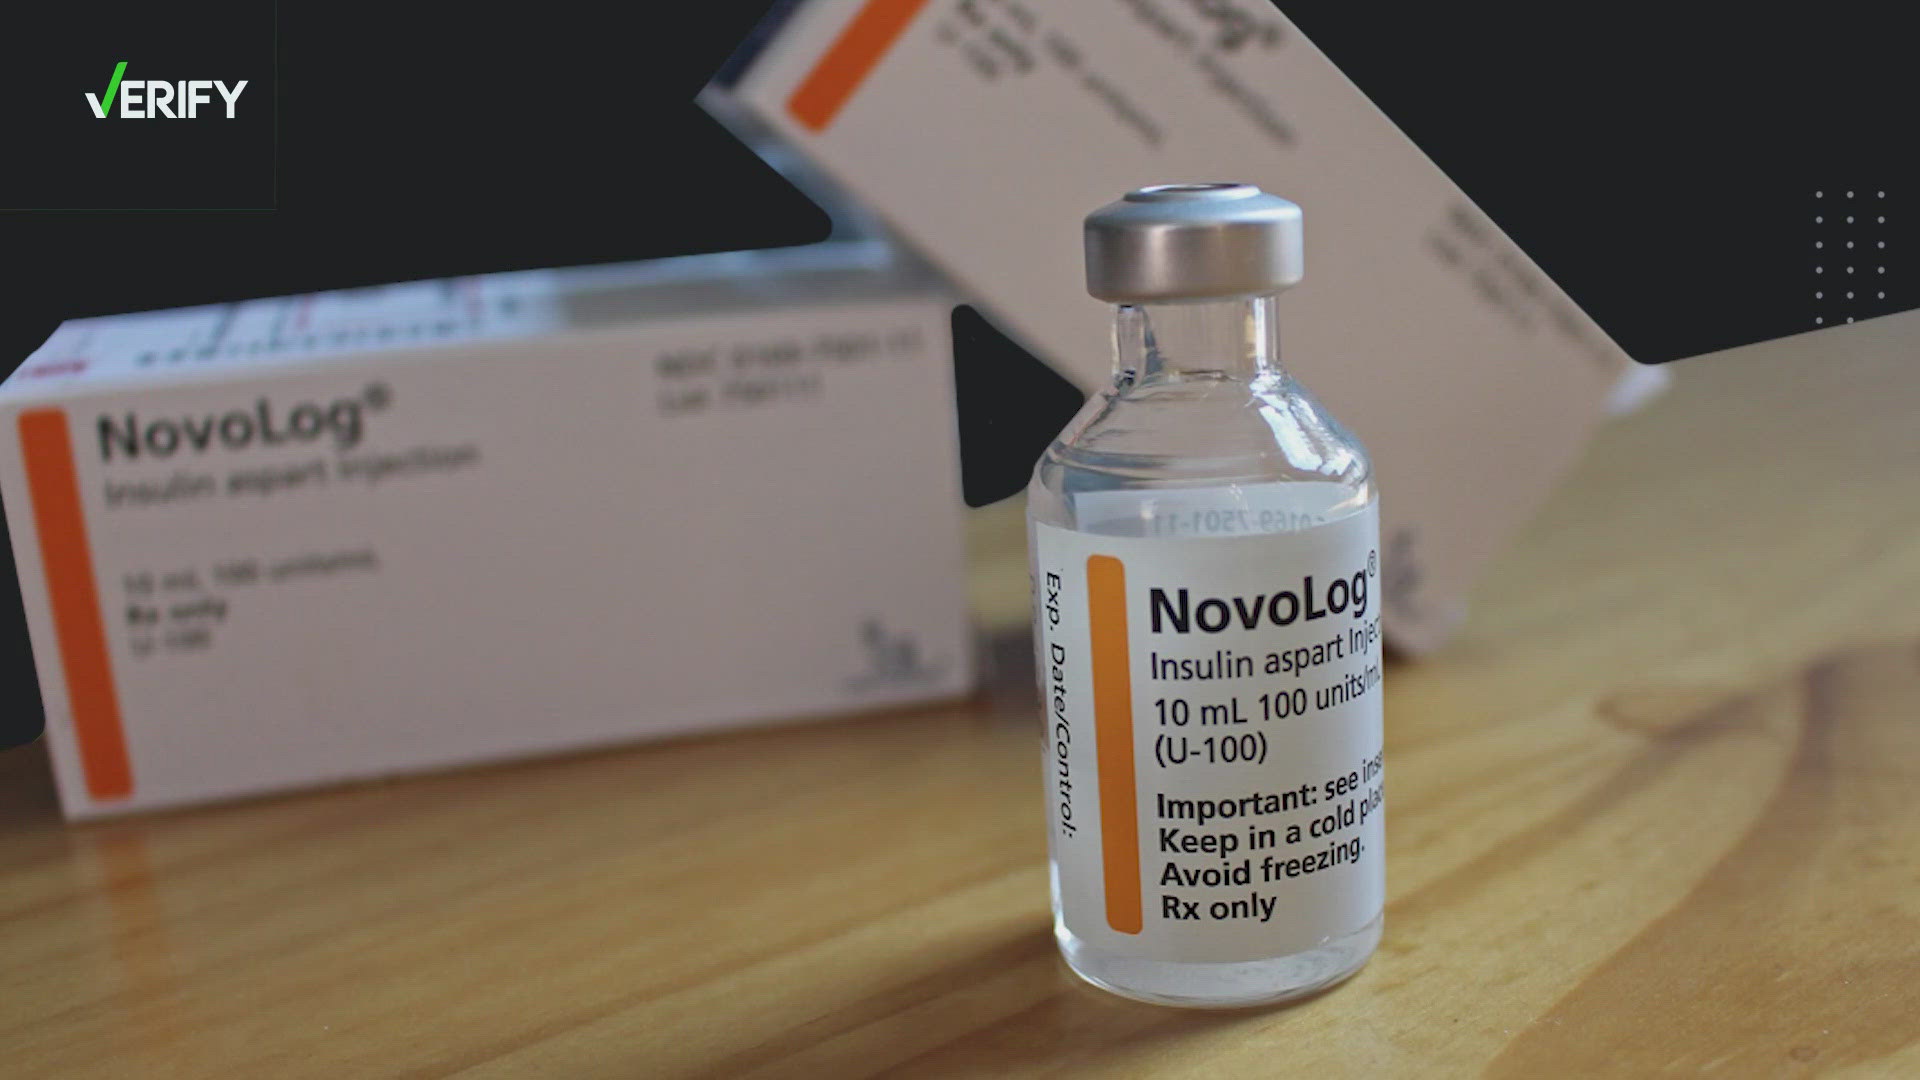 A KHOU 11 Viewer contacted the KHOU 11 Verify team to find out if there was a supply shortage of the insulin drug NovoLog.